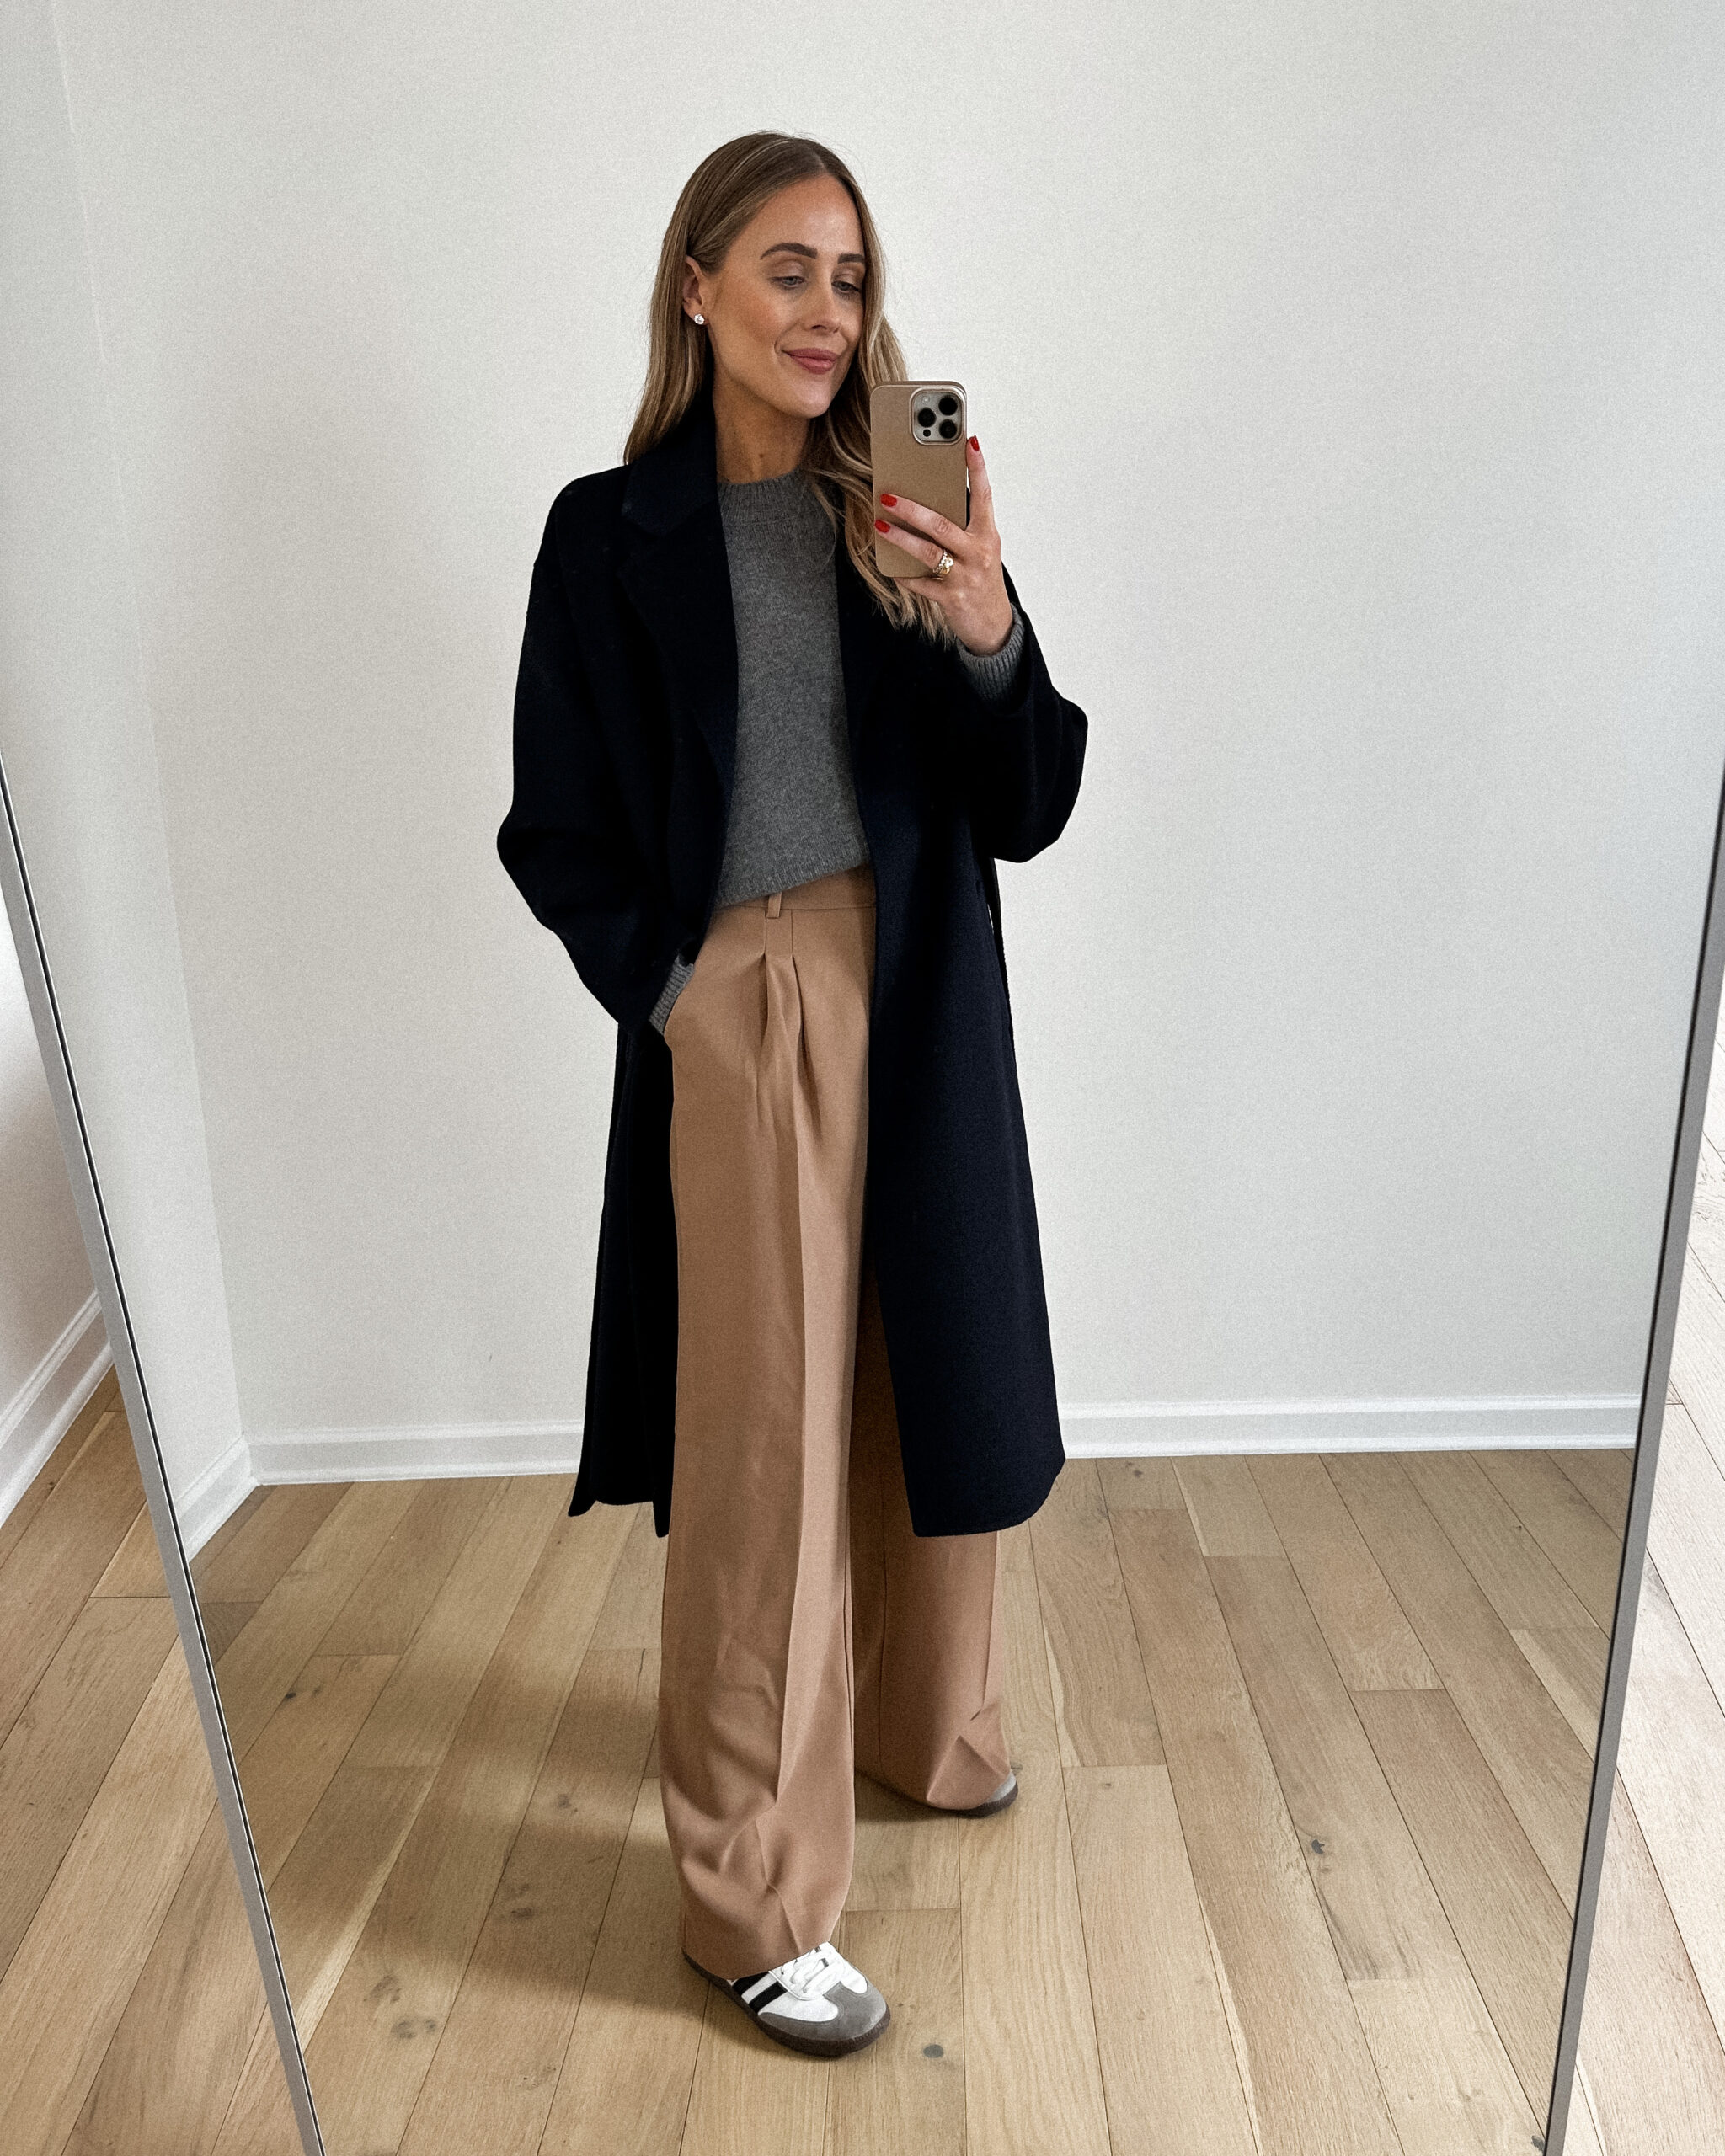 Fashion Jackson Wearing Navy Wool Cashmere Double Faced Wrap Coat, Grey Sweater, Camel Wide Leg Trousers, Adidas samba sneakers, dressy casual outfit